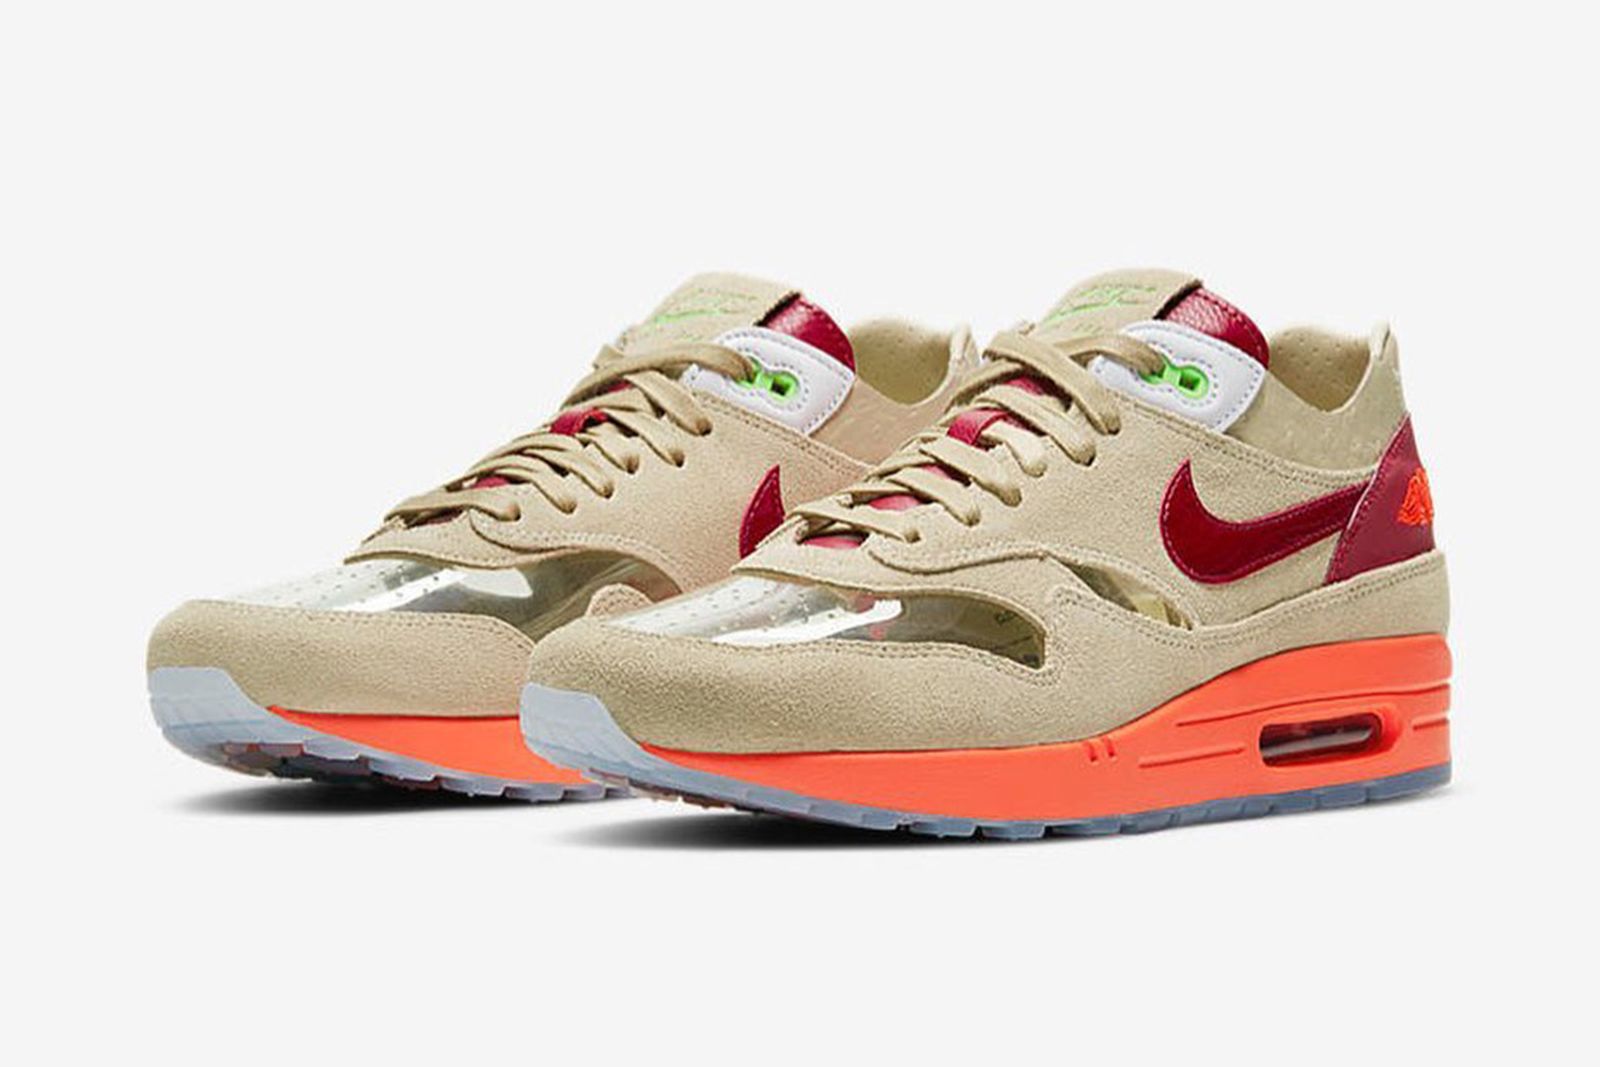 clot-nike-air-max-1-kiss-of-death-2021-release-date-price-01